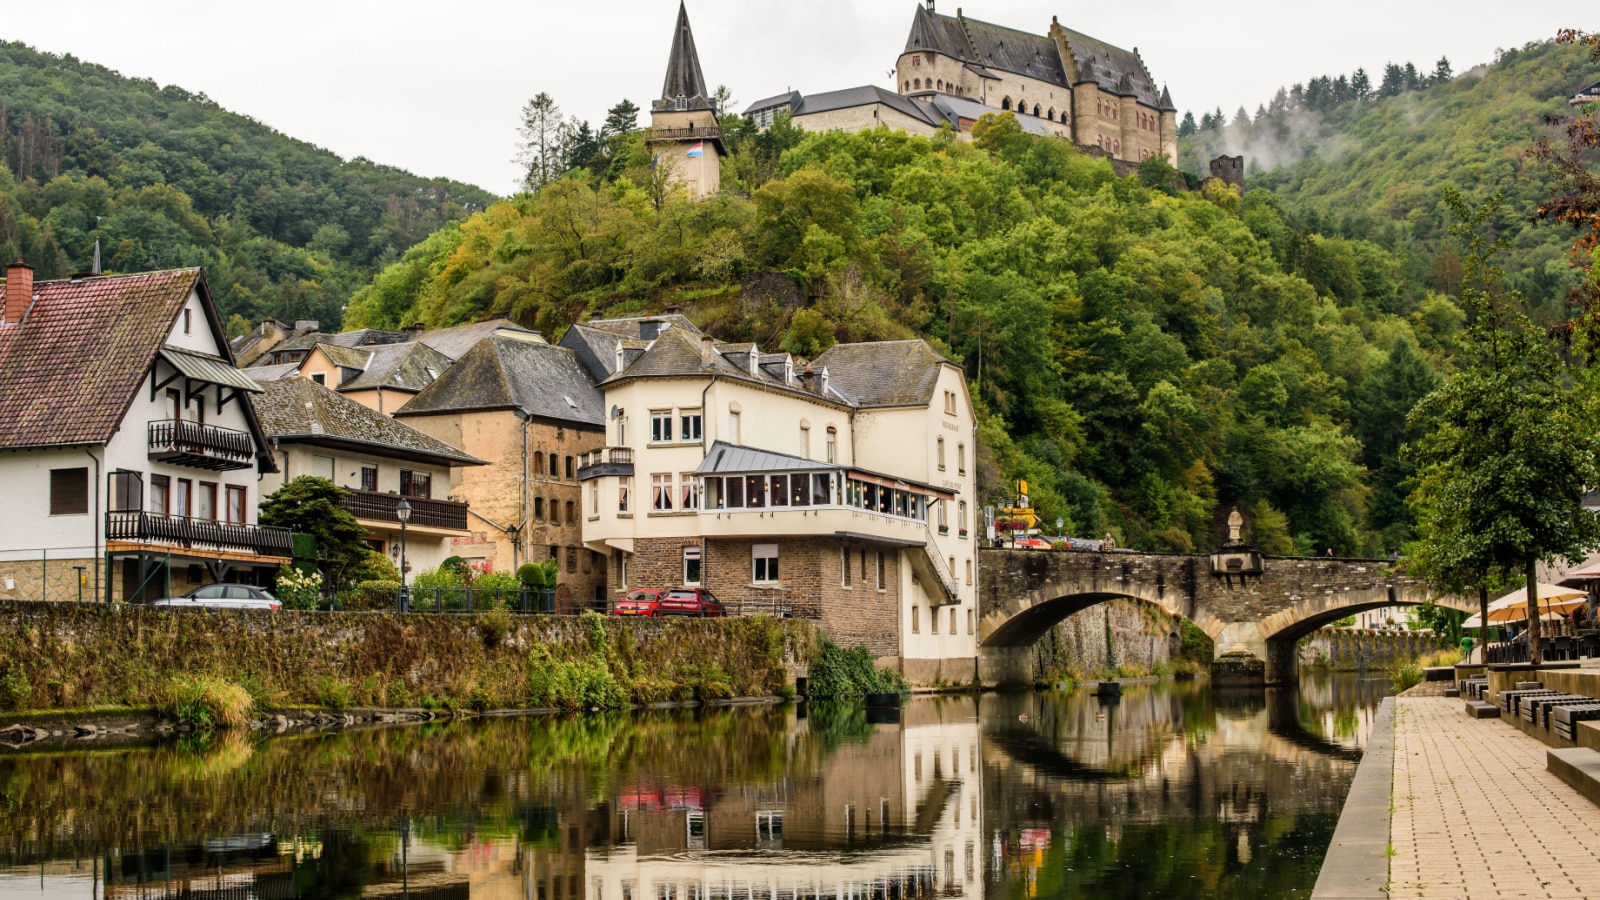 Vianden, Luxembourg - September 7, 2019: The view north-west up the river Our to the village and Vianden Castle on the hills in the background